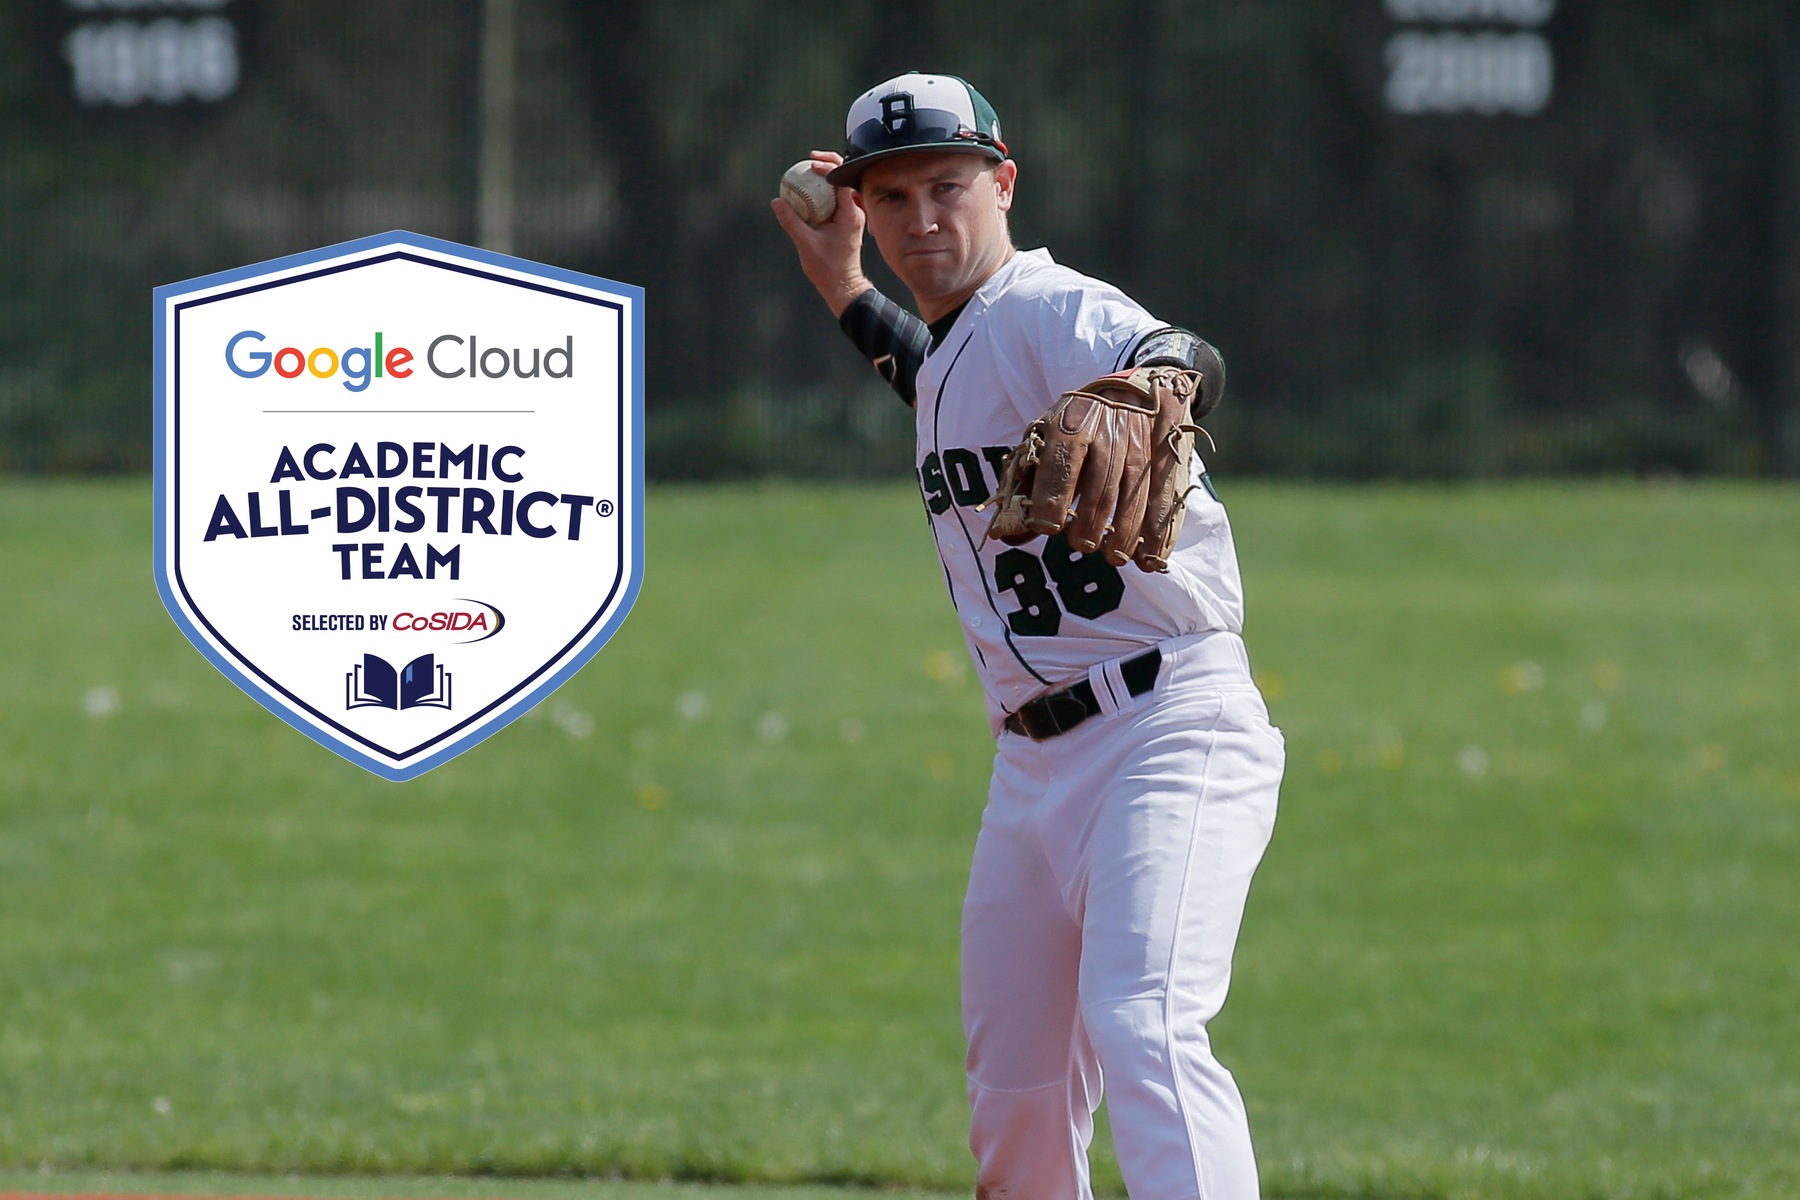 Nickerson selected Google Cloud Academic All-District